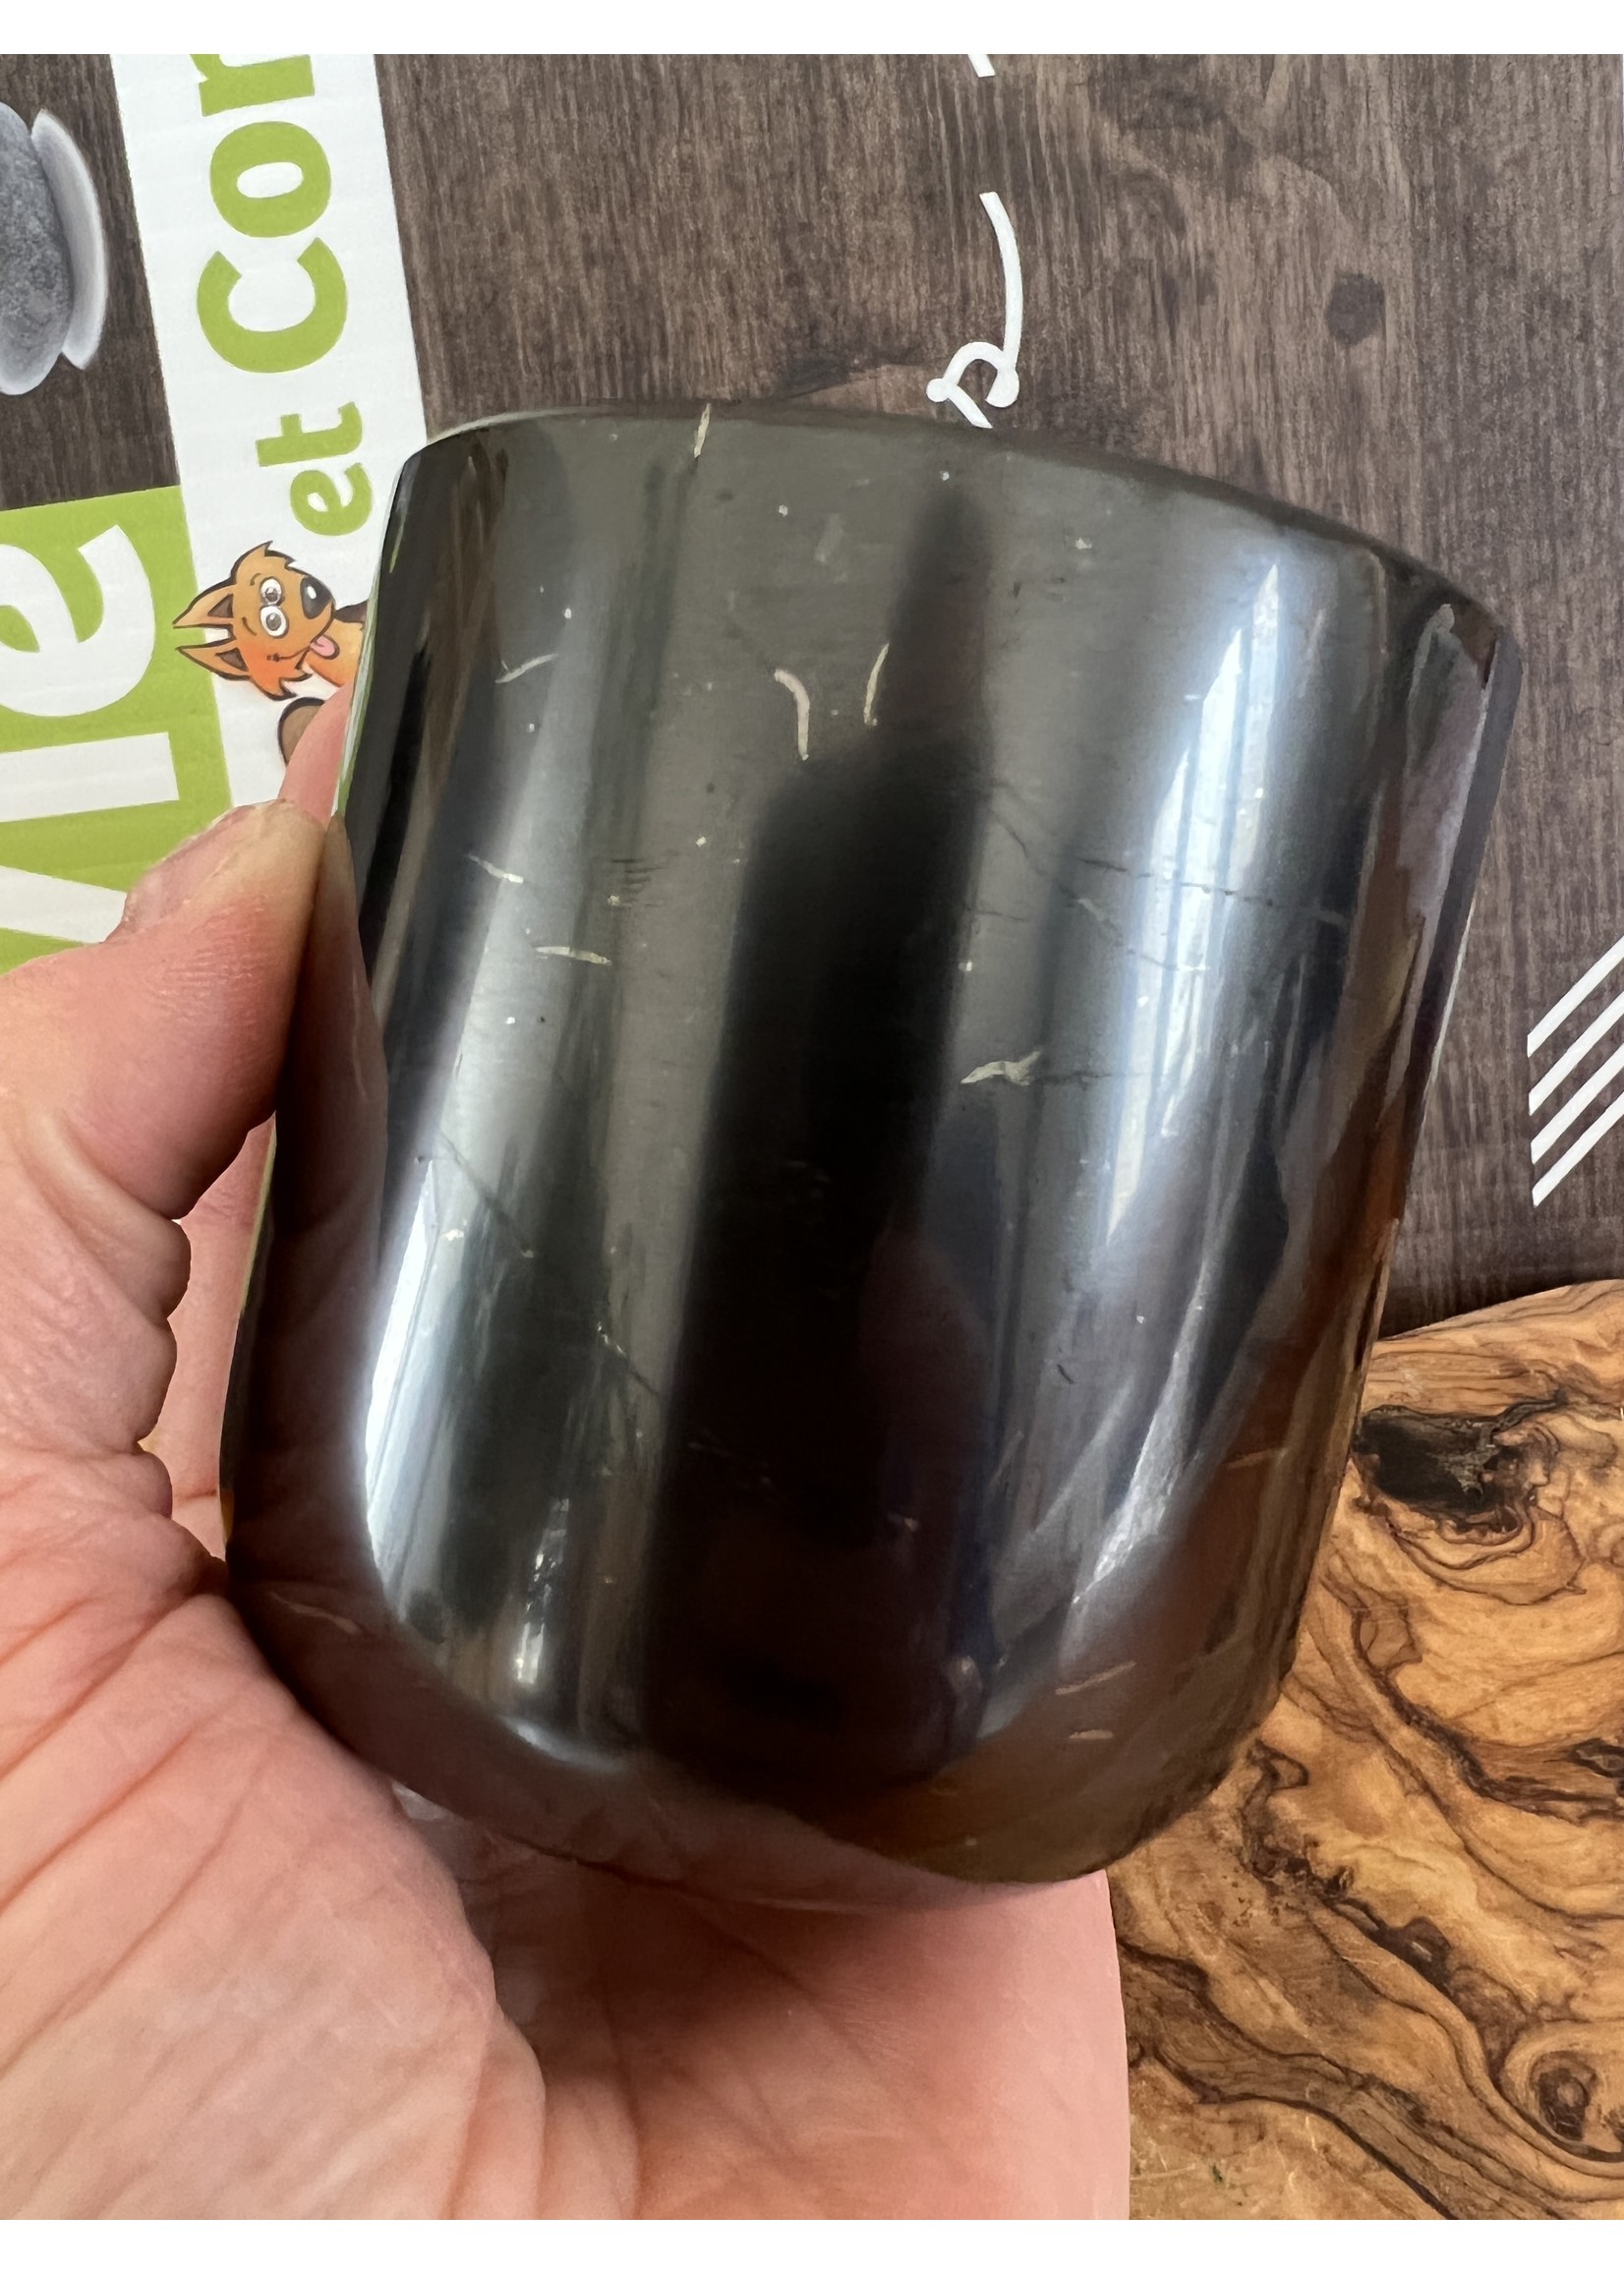 unique shungite glass handcrafted from solid shungite stone, drink a sip of shungite water